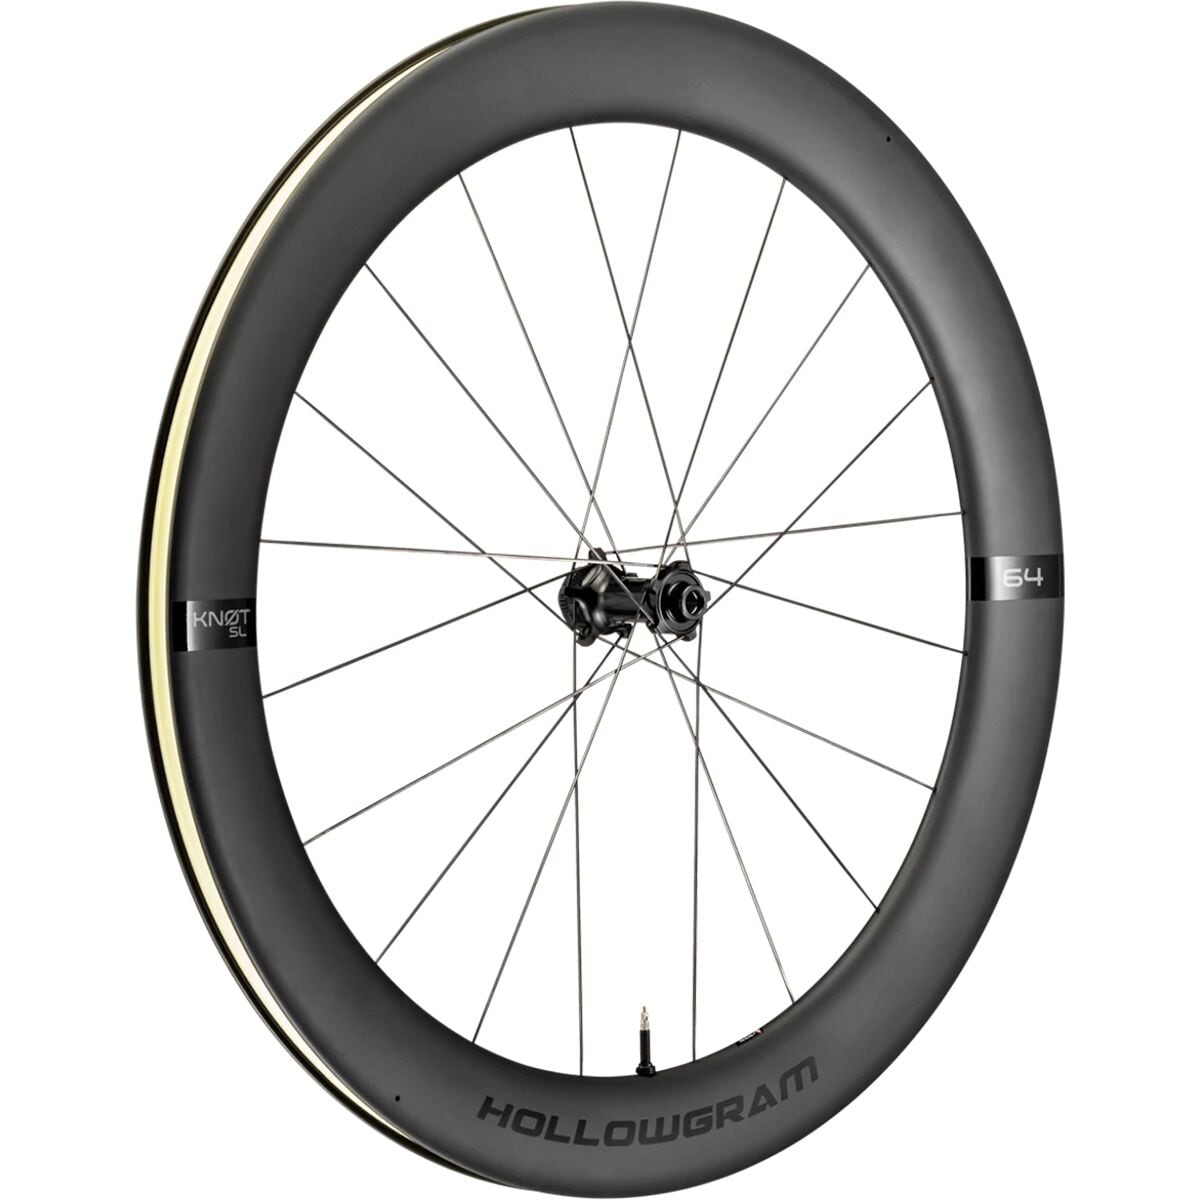 Cannondale HollowGram 64 SL Knot Wheel - Tubeless - Components